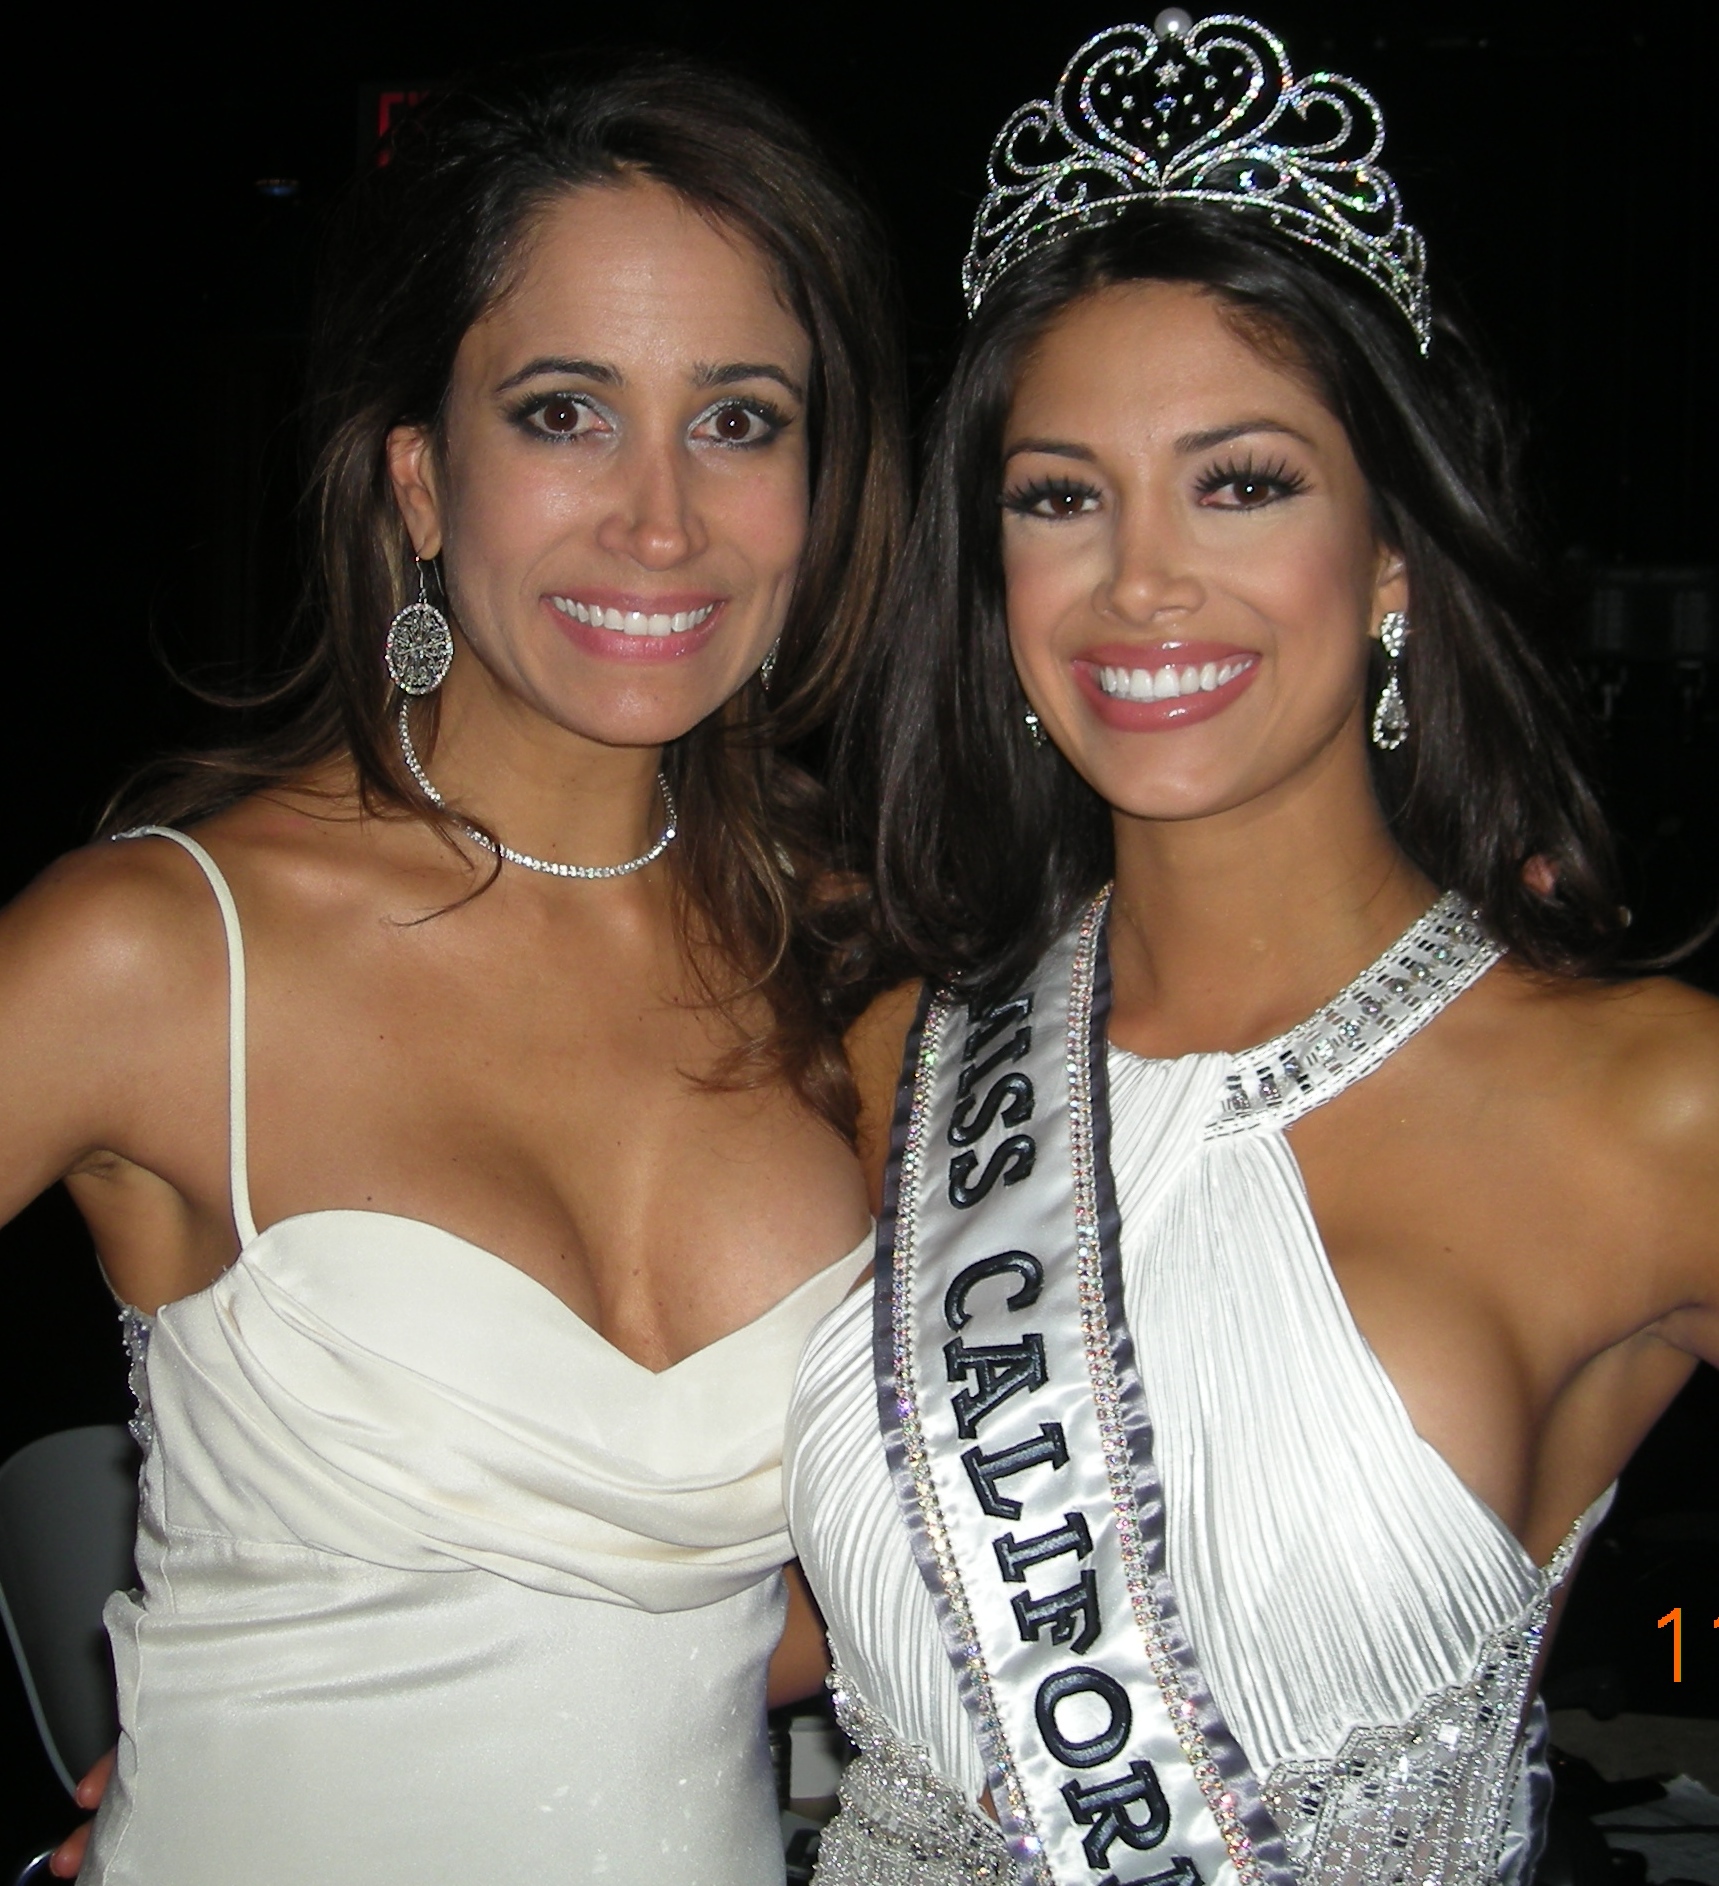 With Nicole Johnson. One of the girls I Coached for the Miss California USA Pageant